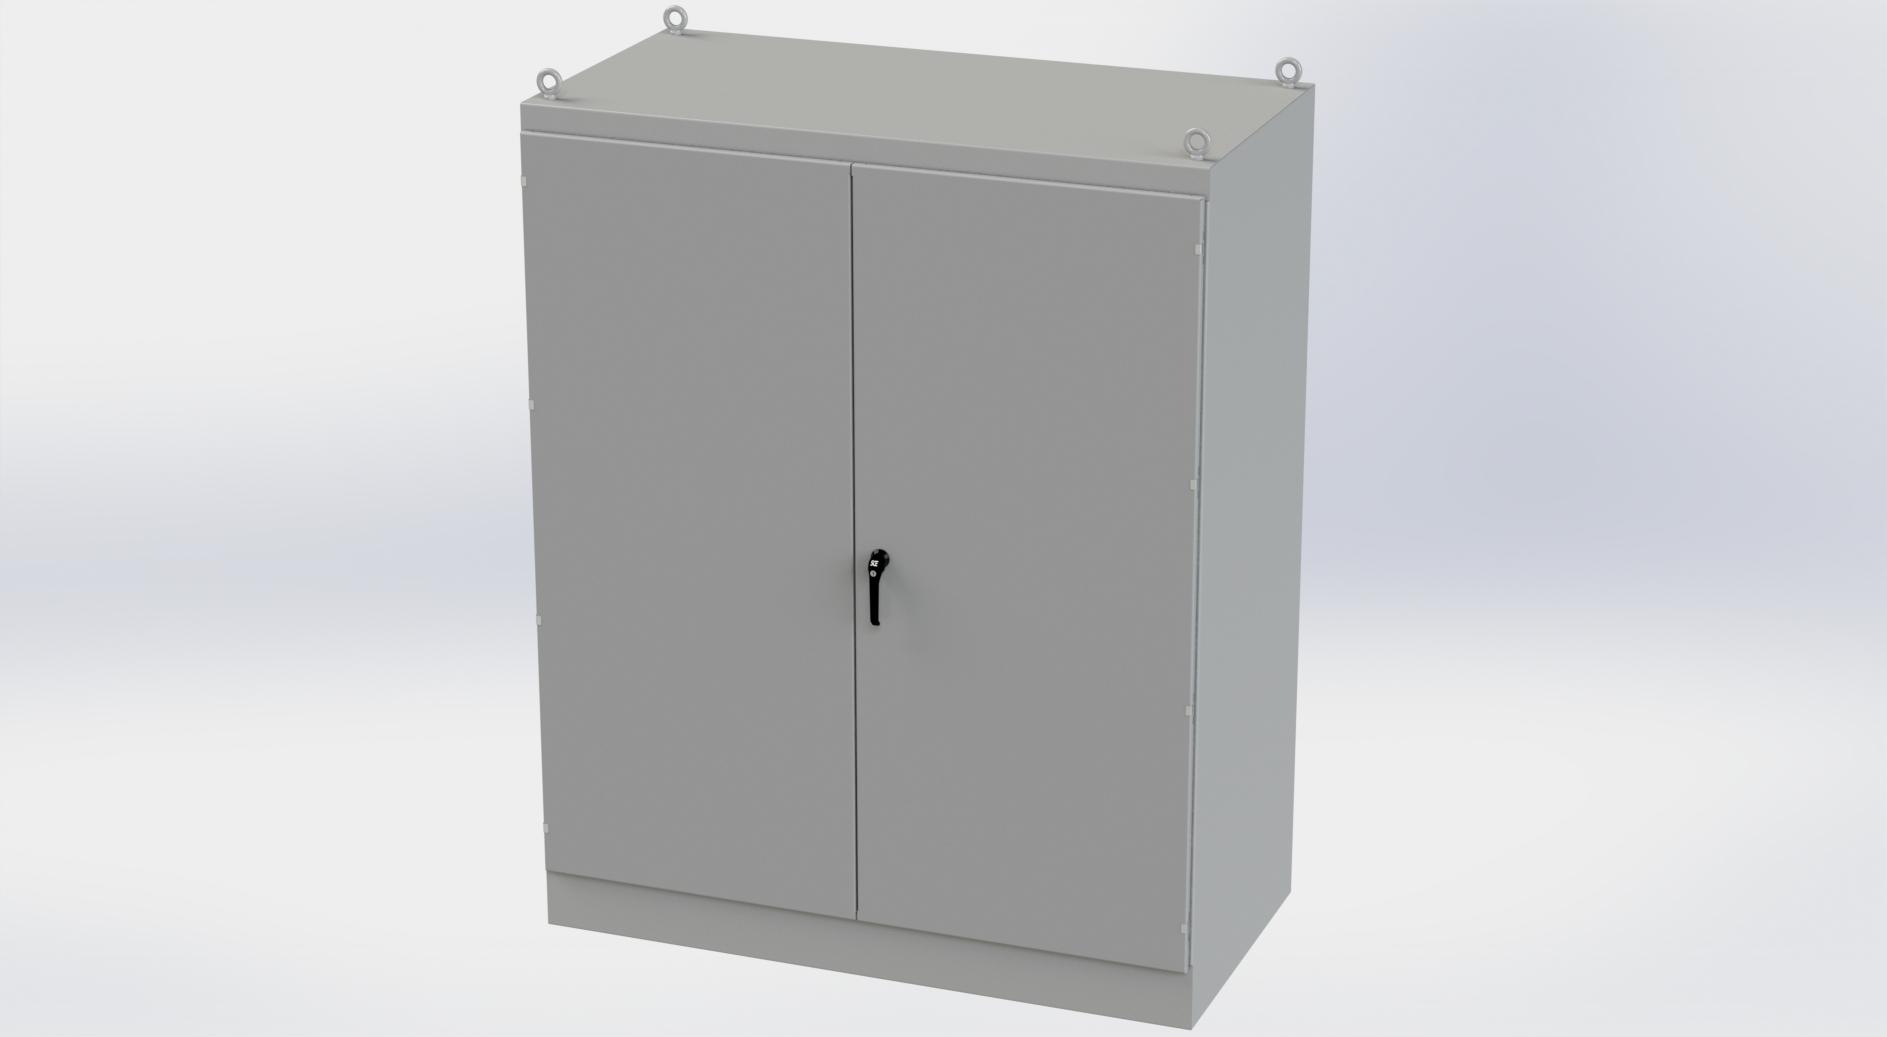 Saginaw Control SCE-907236FSD FSD Enclosure, Height:90.00", Width:72.00", Depth:36.00", ANSI-61 gray finish inside and out. Optional sub-panels are powder coated white.